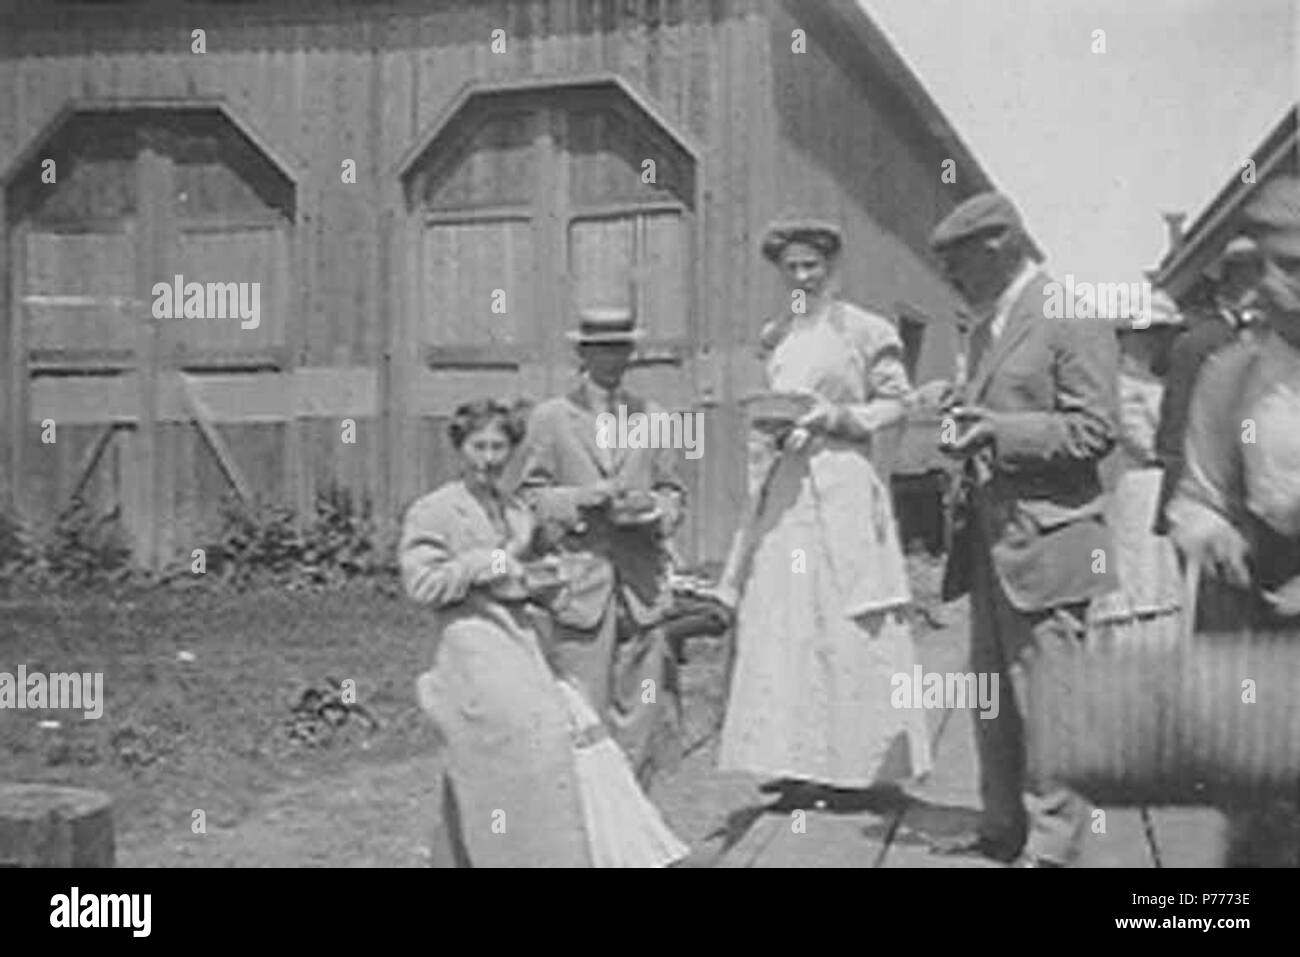 . English: Group of people at train station, Nova Scotia, Canada, 1910 . English: Written on page: On way to Halifax, Nova Scotia to be married. Robert Chandless, Florence and Harry Wrieters PH Coll 214.J69d . 1910 5 Group of people at train station, Nova Scotia, Canada, 1910 (CHANDLESS 254) Stock Photo